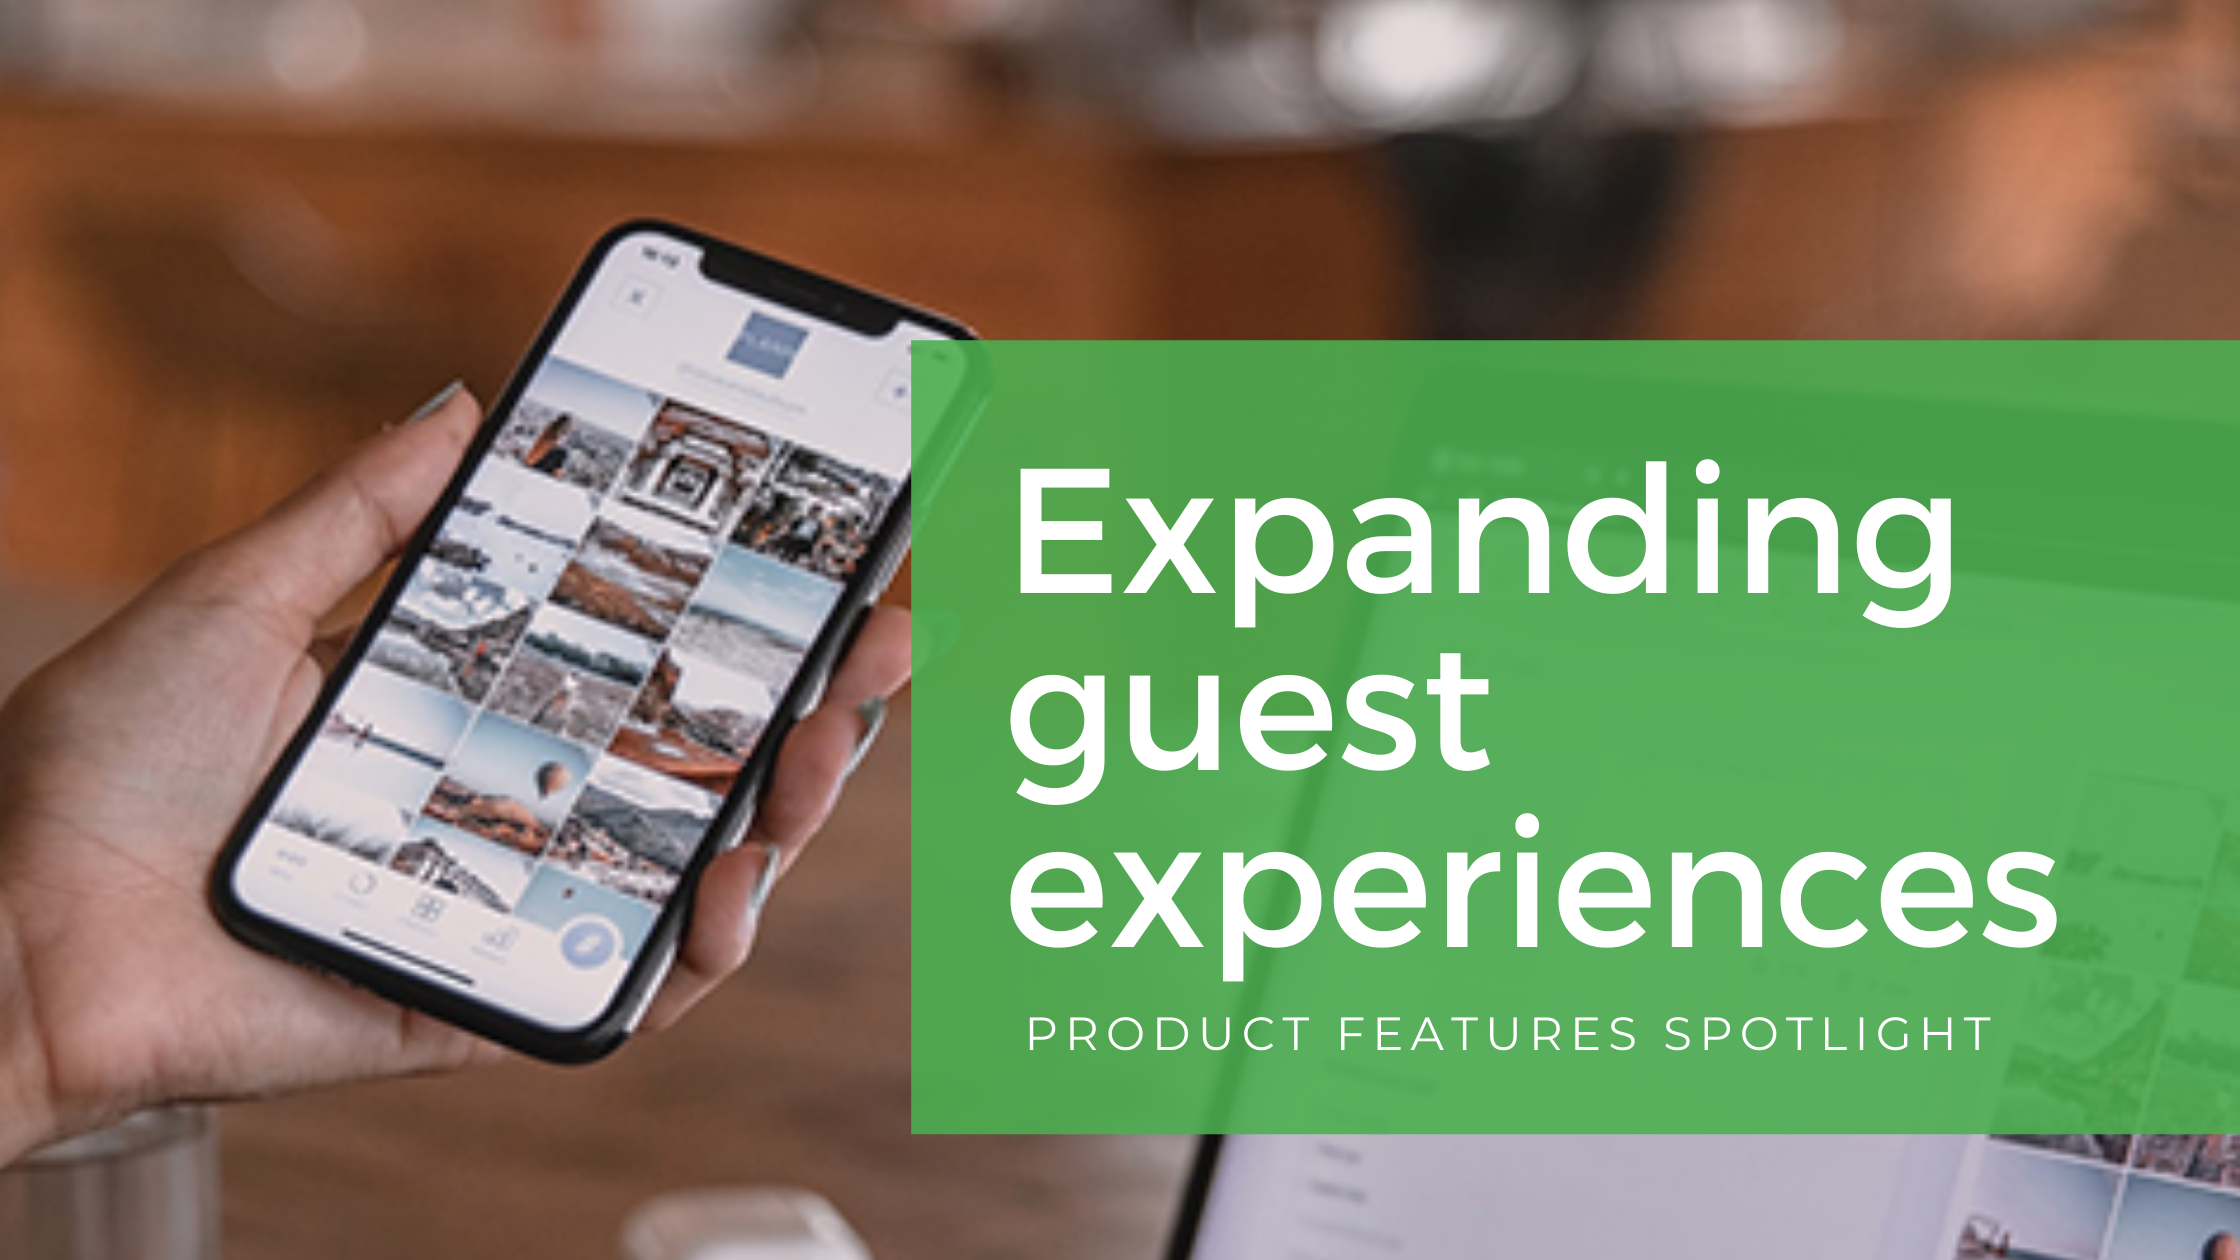 Expanding guest experiences, part of the PicThrive vision